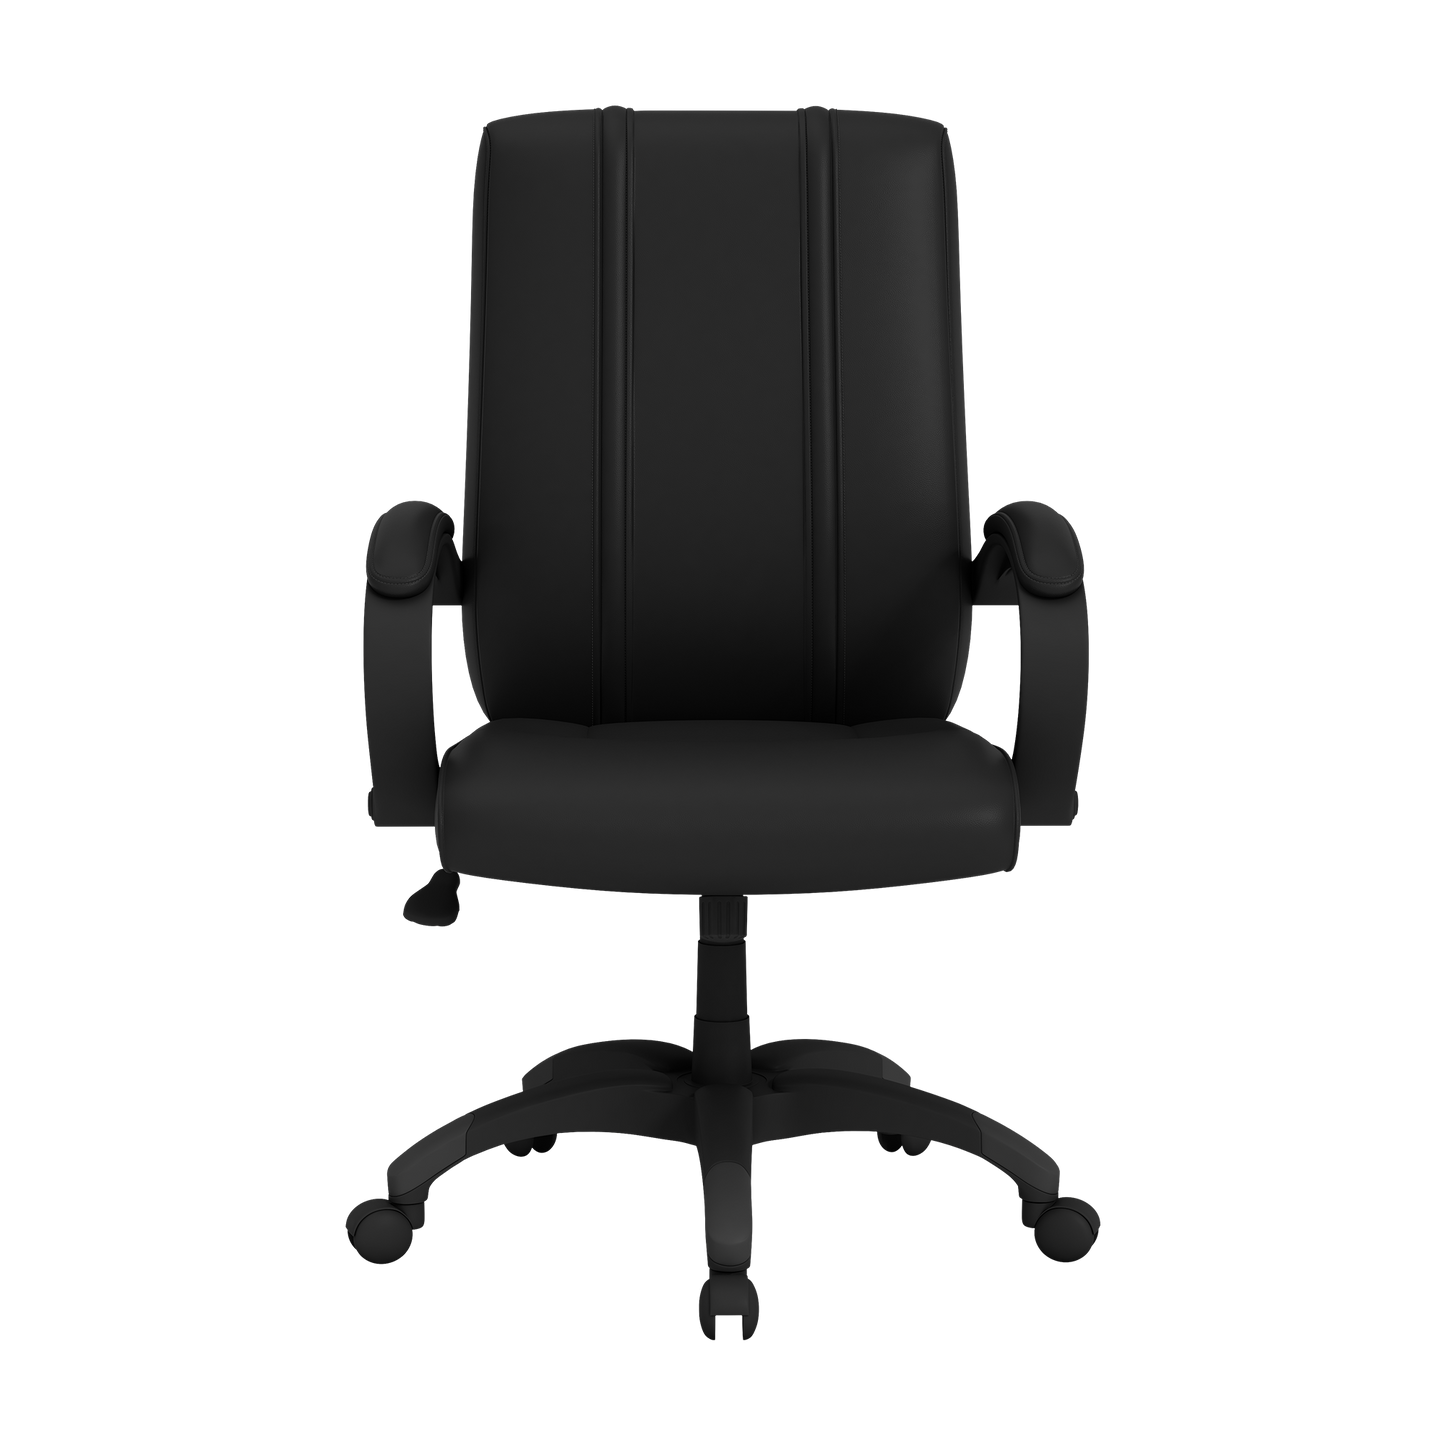 Office Chair 1000 with Chevrolet Alternate Logo